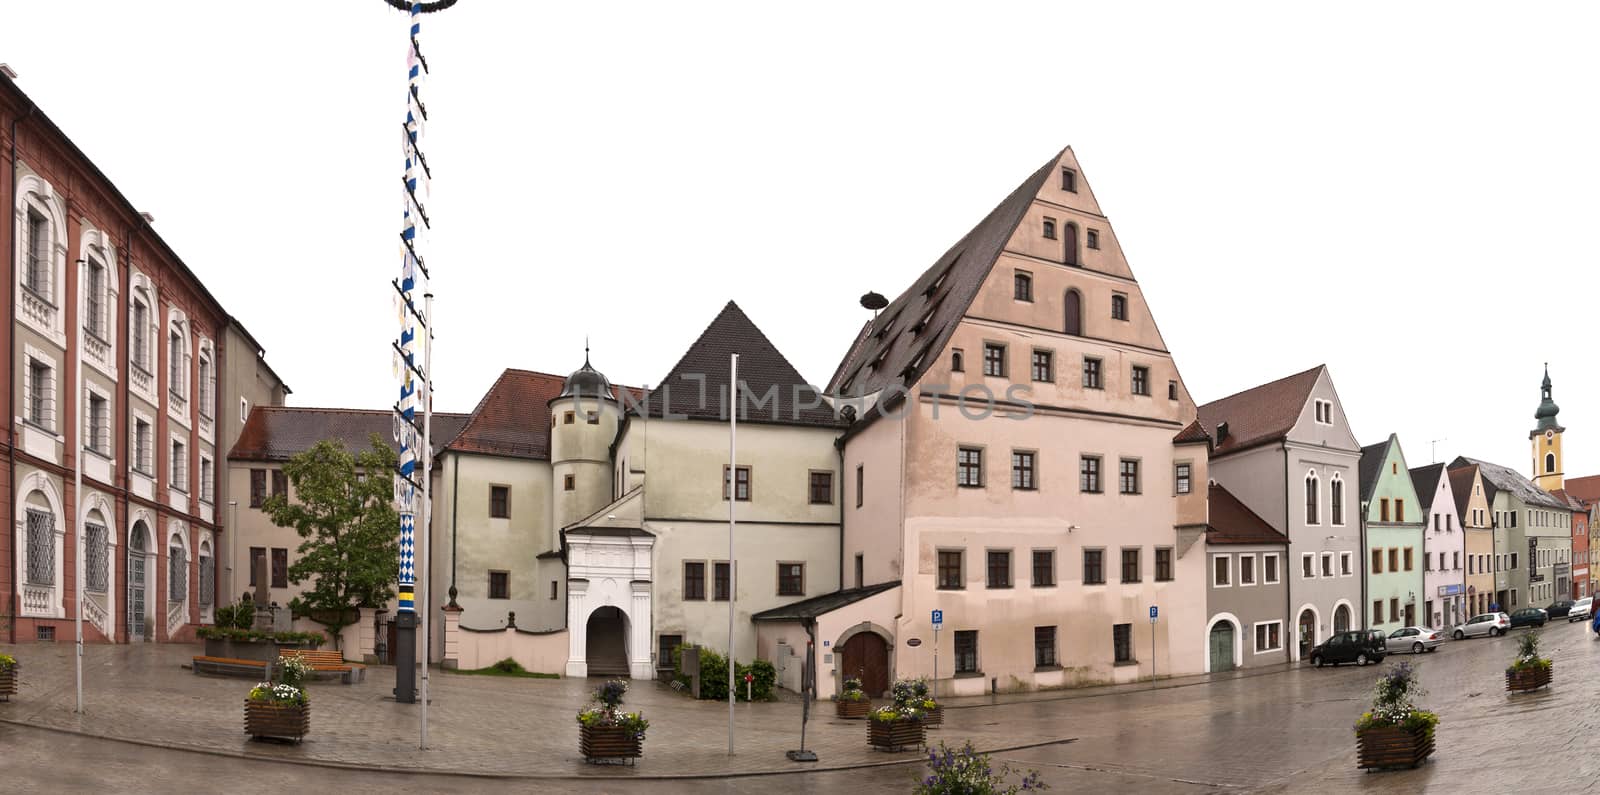 In the old Town of Neustadt in Germany